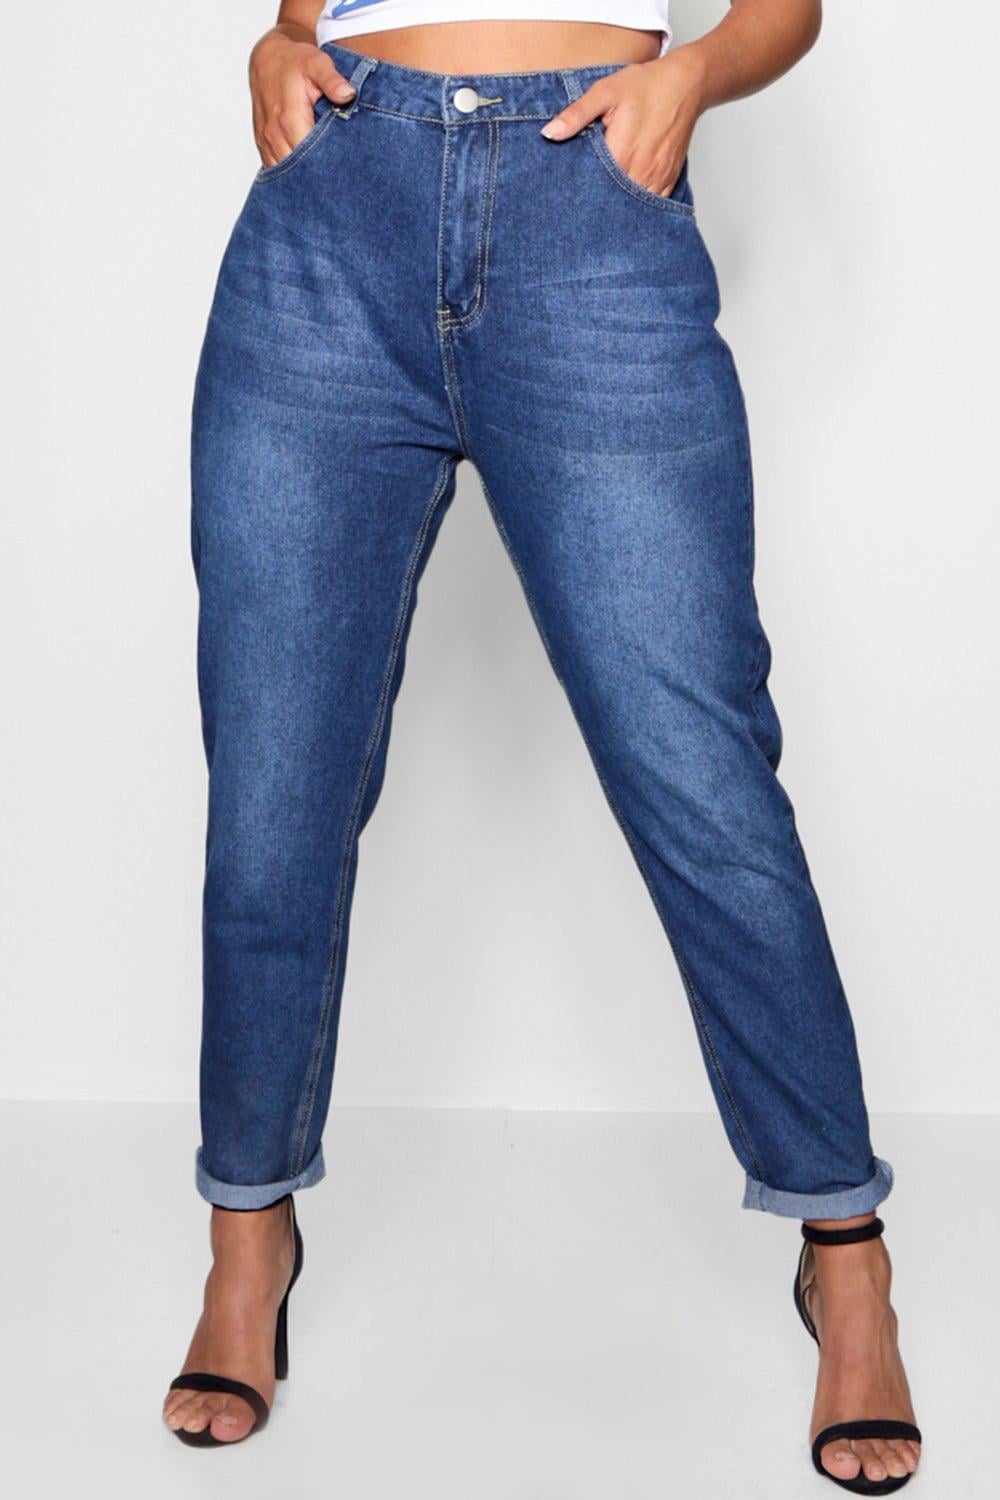 most flattering jeans for curvy figures